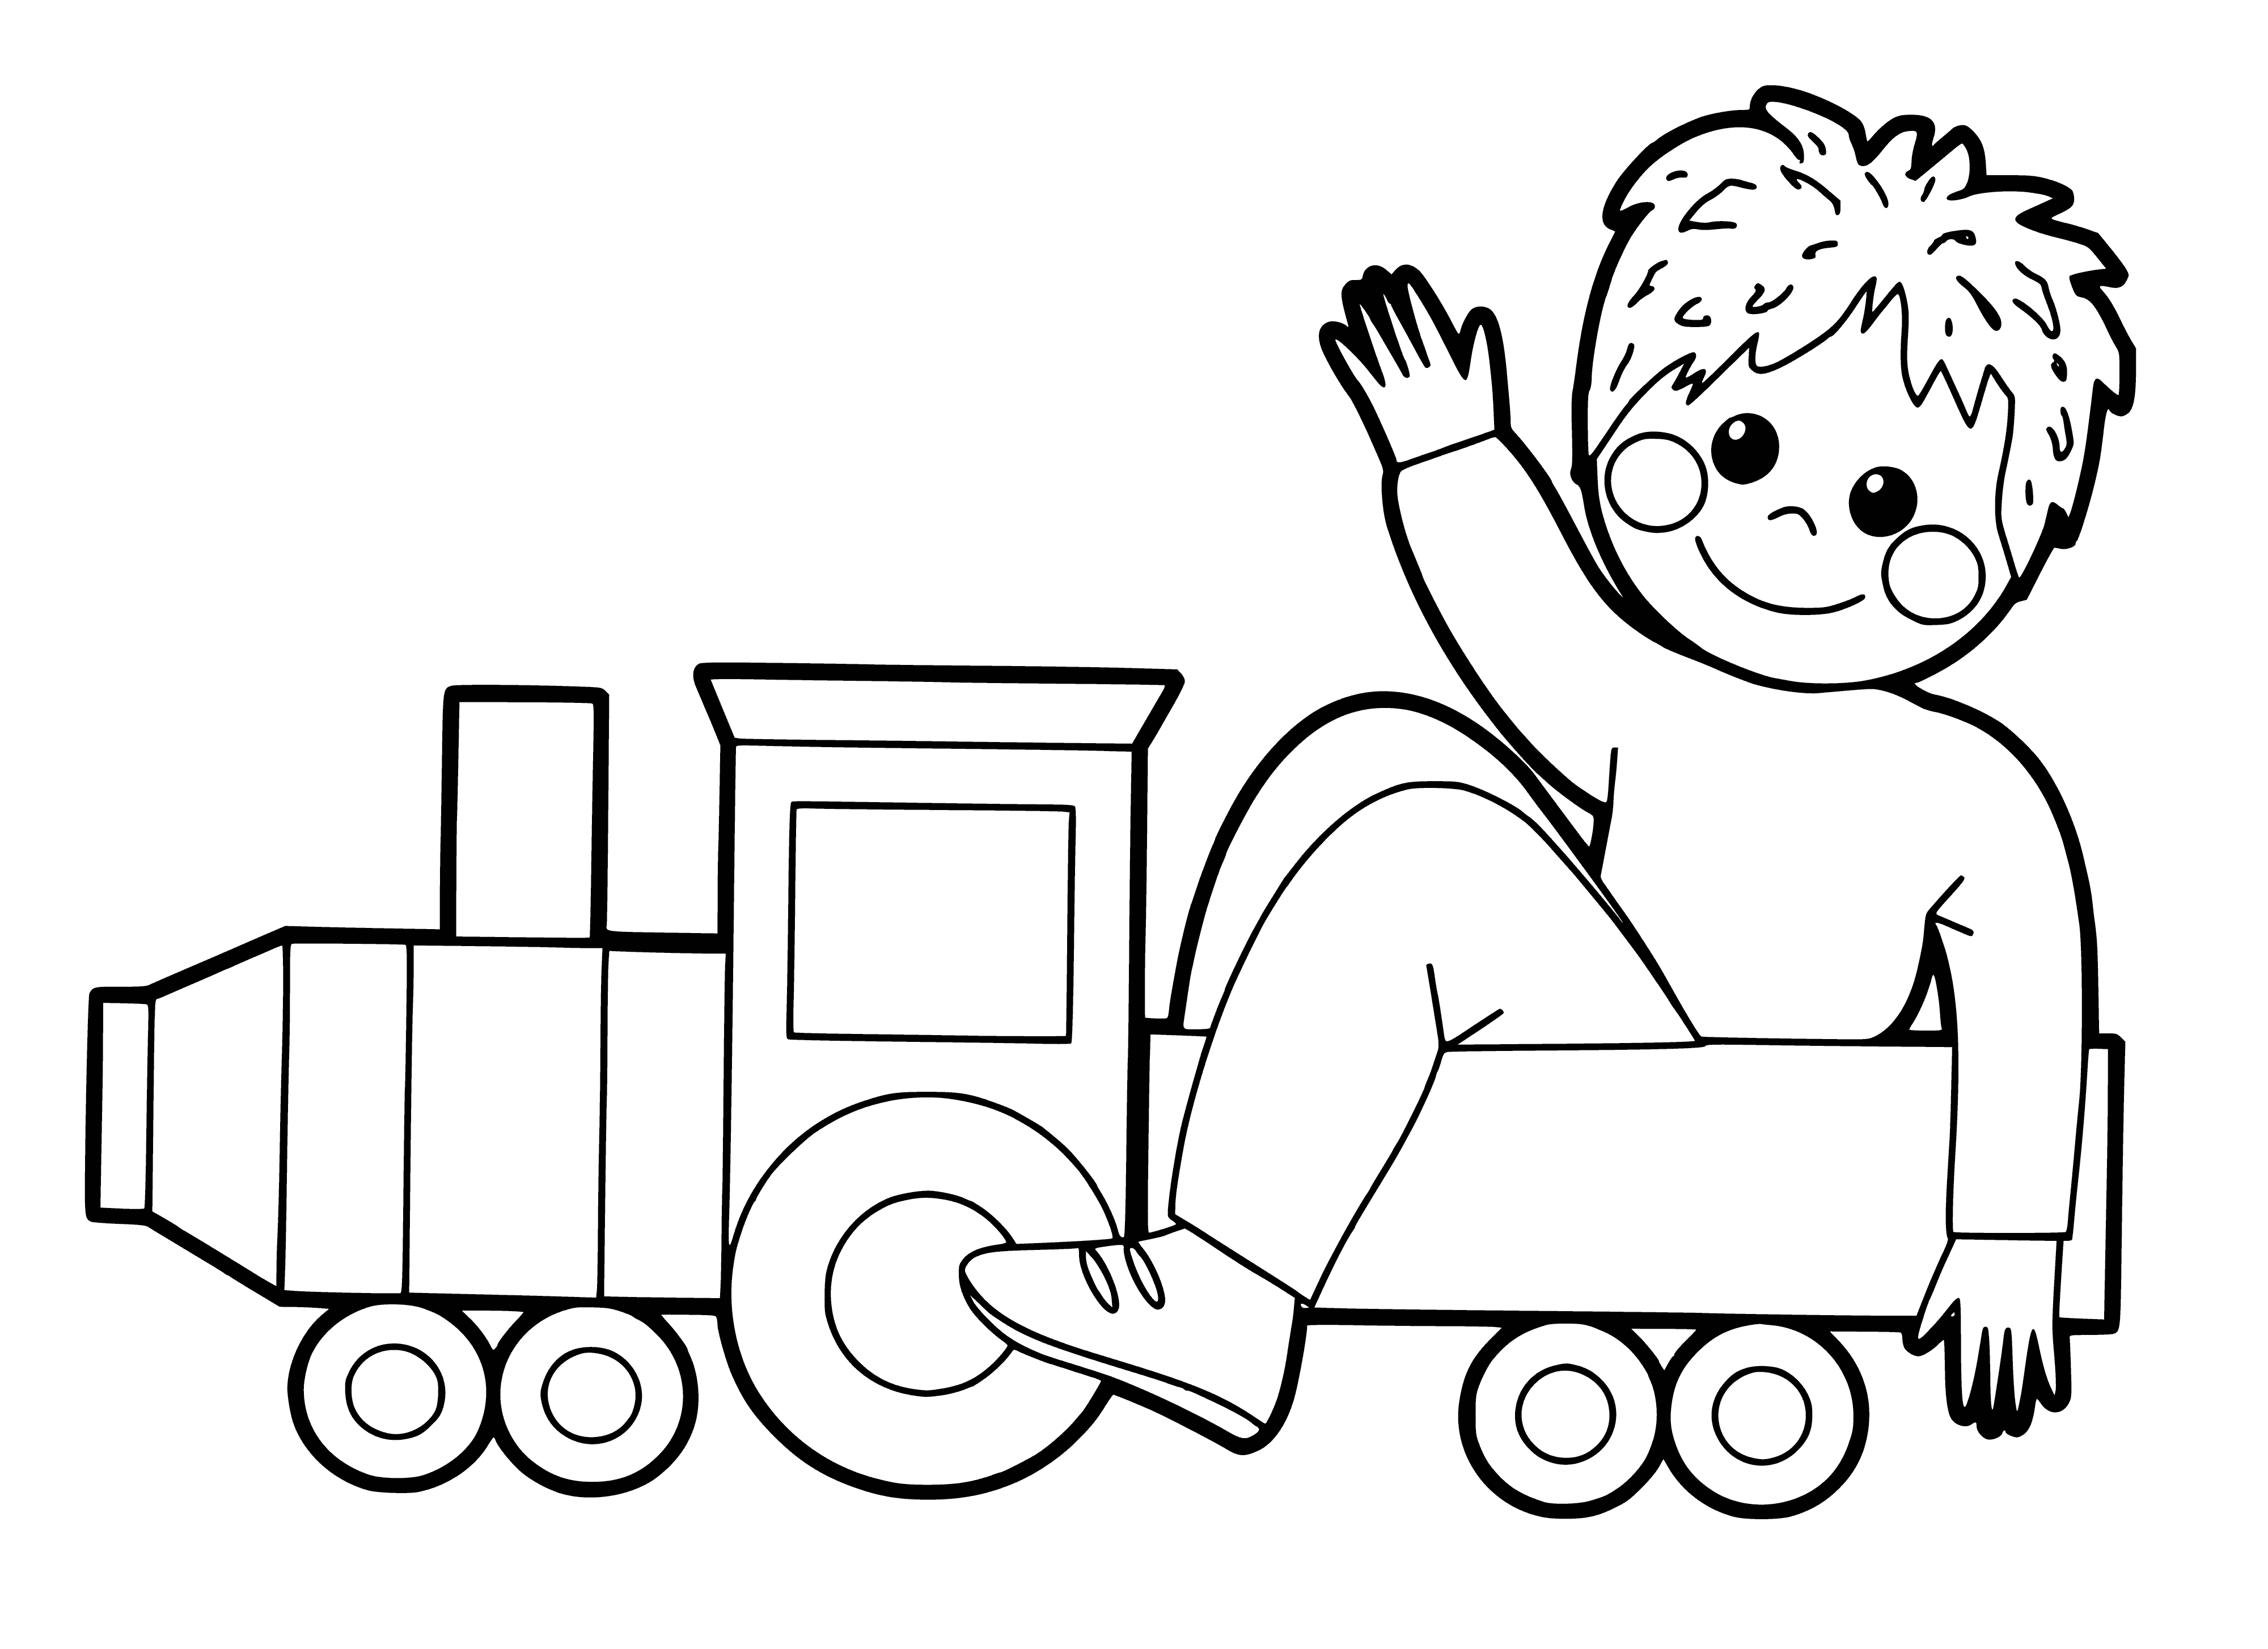 Vehicle with trailer coloring page